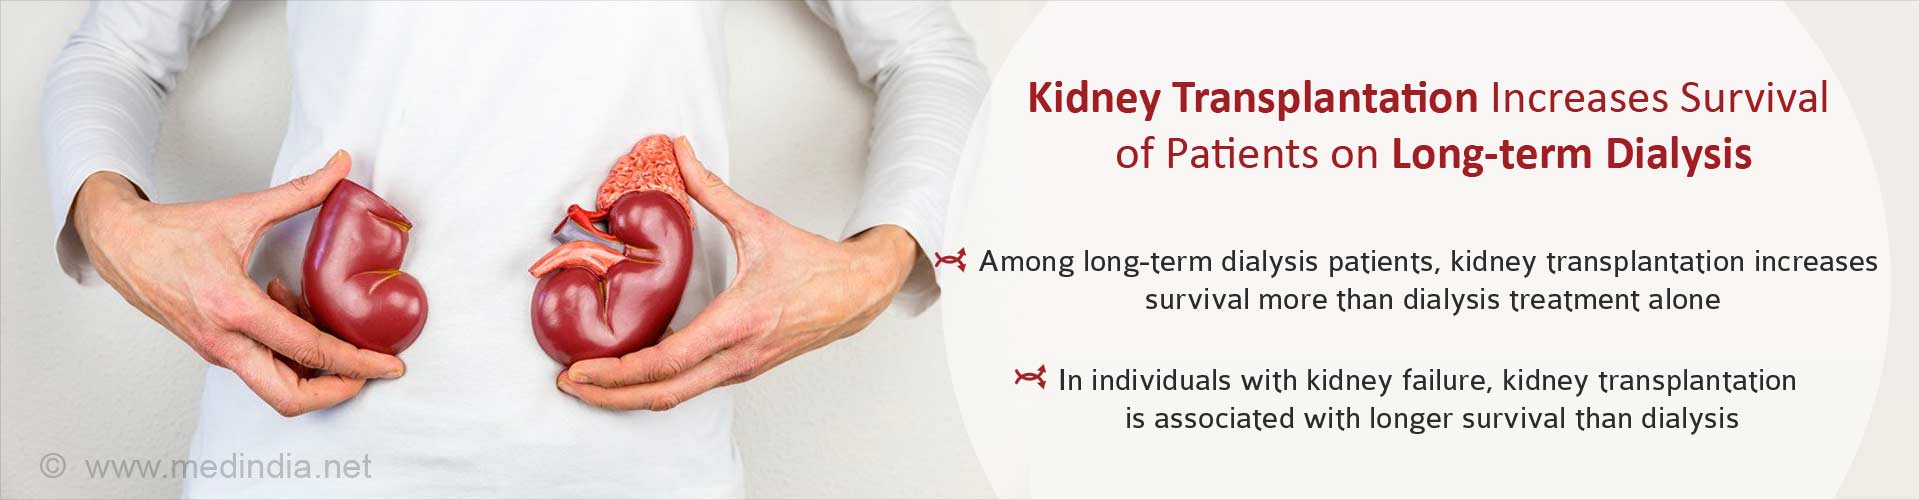 Kidney Transplantation Increases Survival of Patients on Long-term Dialysis
- Kidney transplantation is associated with better survival in patients who have been on dialysis for more than ten years
- In individual with kidney failure, kidney transplantation is associated with longer survival than dialysis